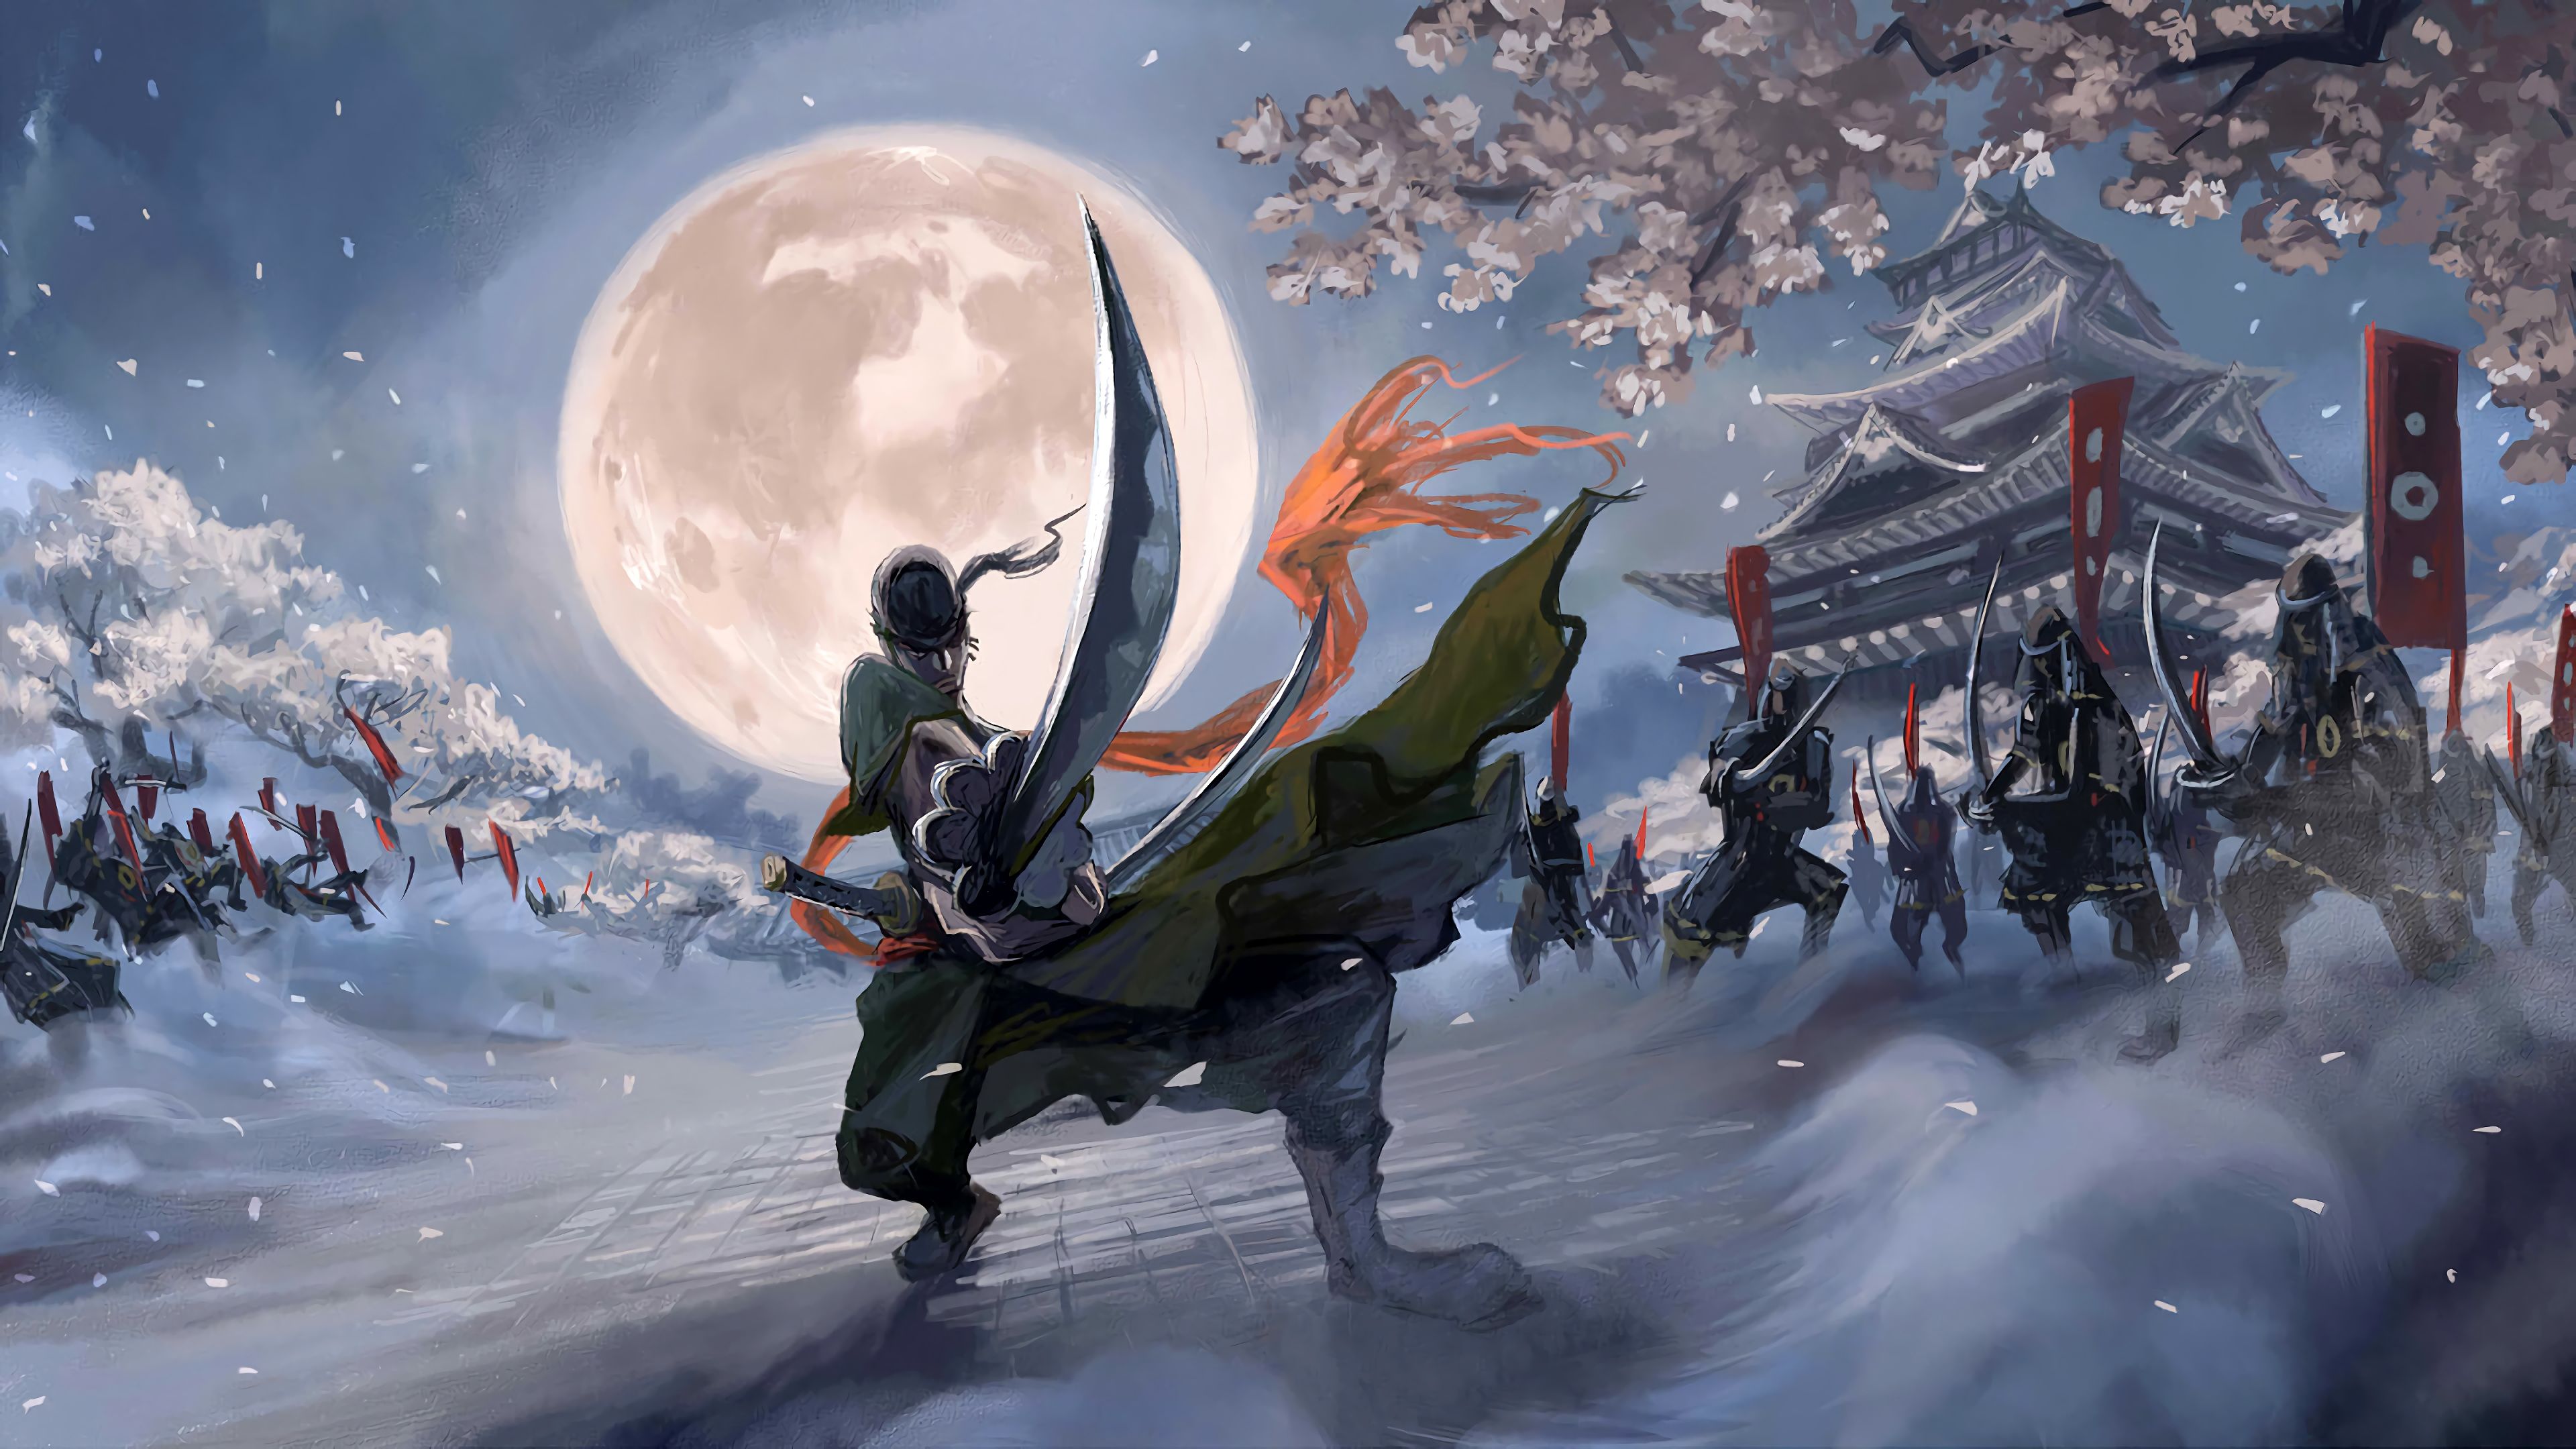 One Piece A Man With Sword Fighting With Background Of Moon 4K HD Anime Wallpaper